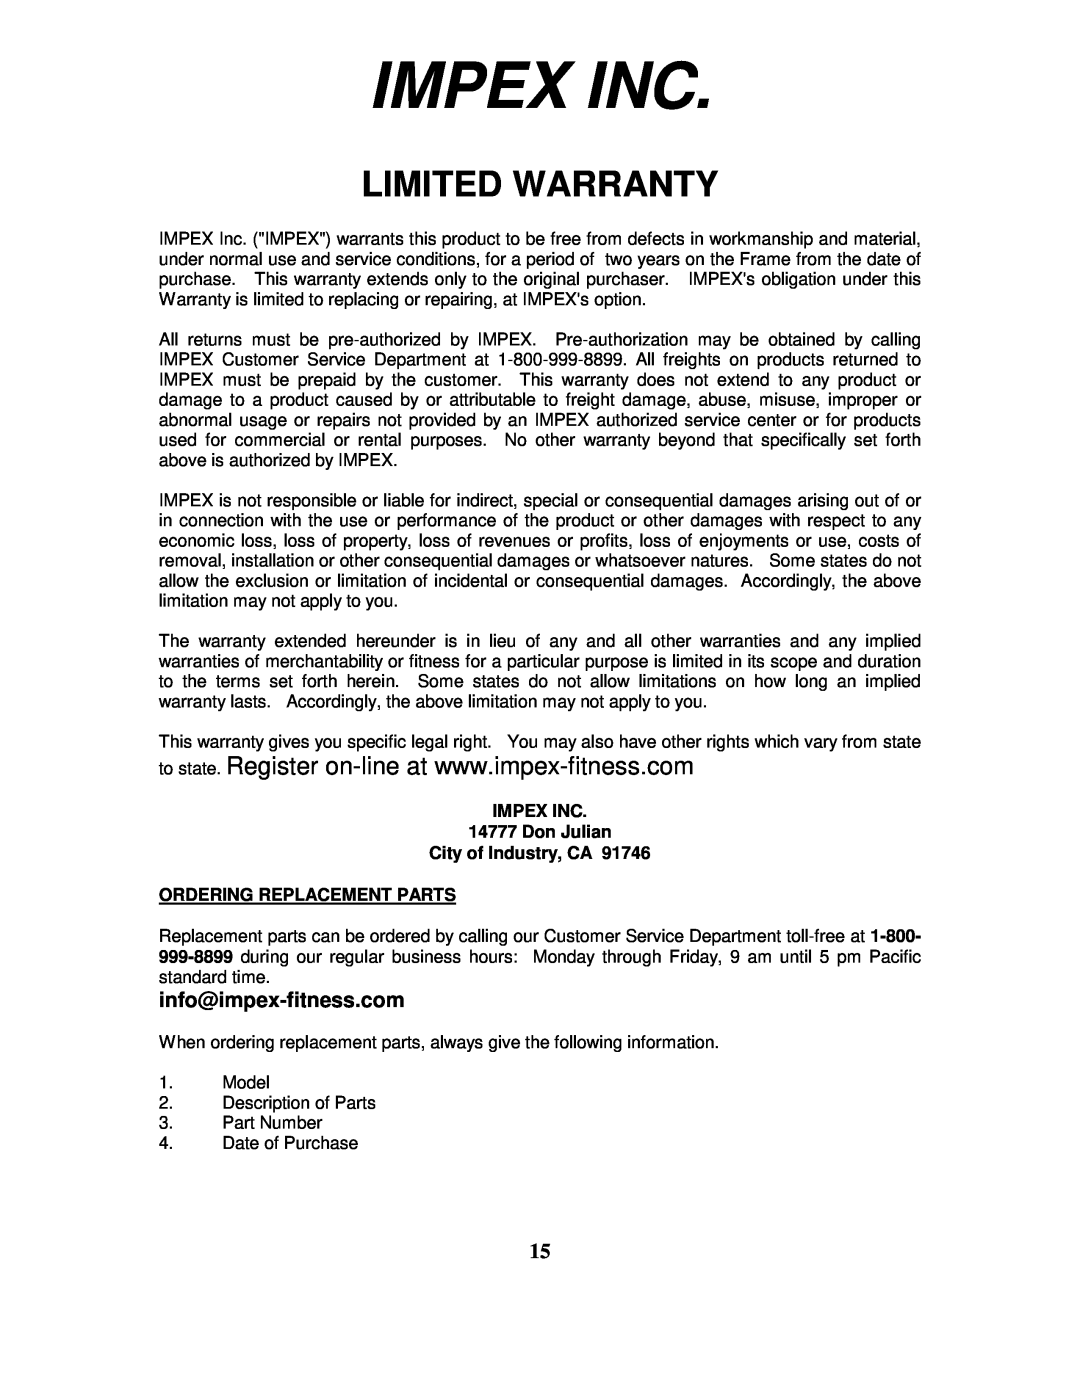 Impex WM 1407 Impex Inc, Limited Warranty, IMPEX INC 14777 Don Julian City of Industry, CA, Ordering Replacement Parts 